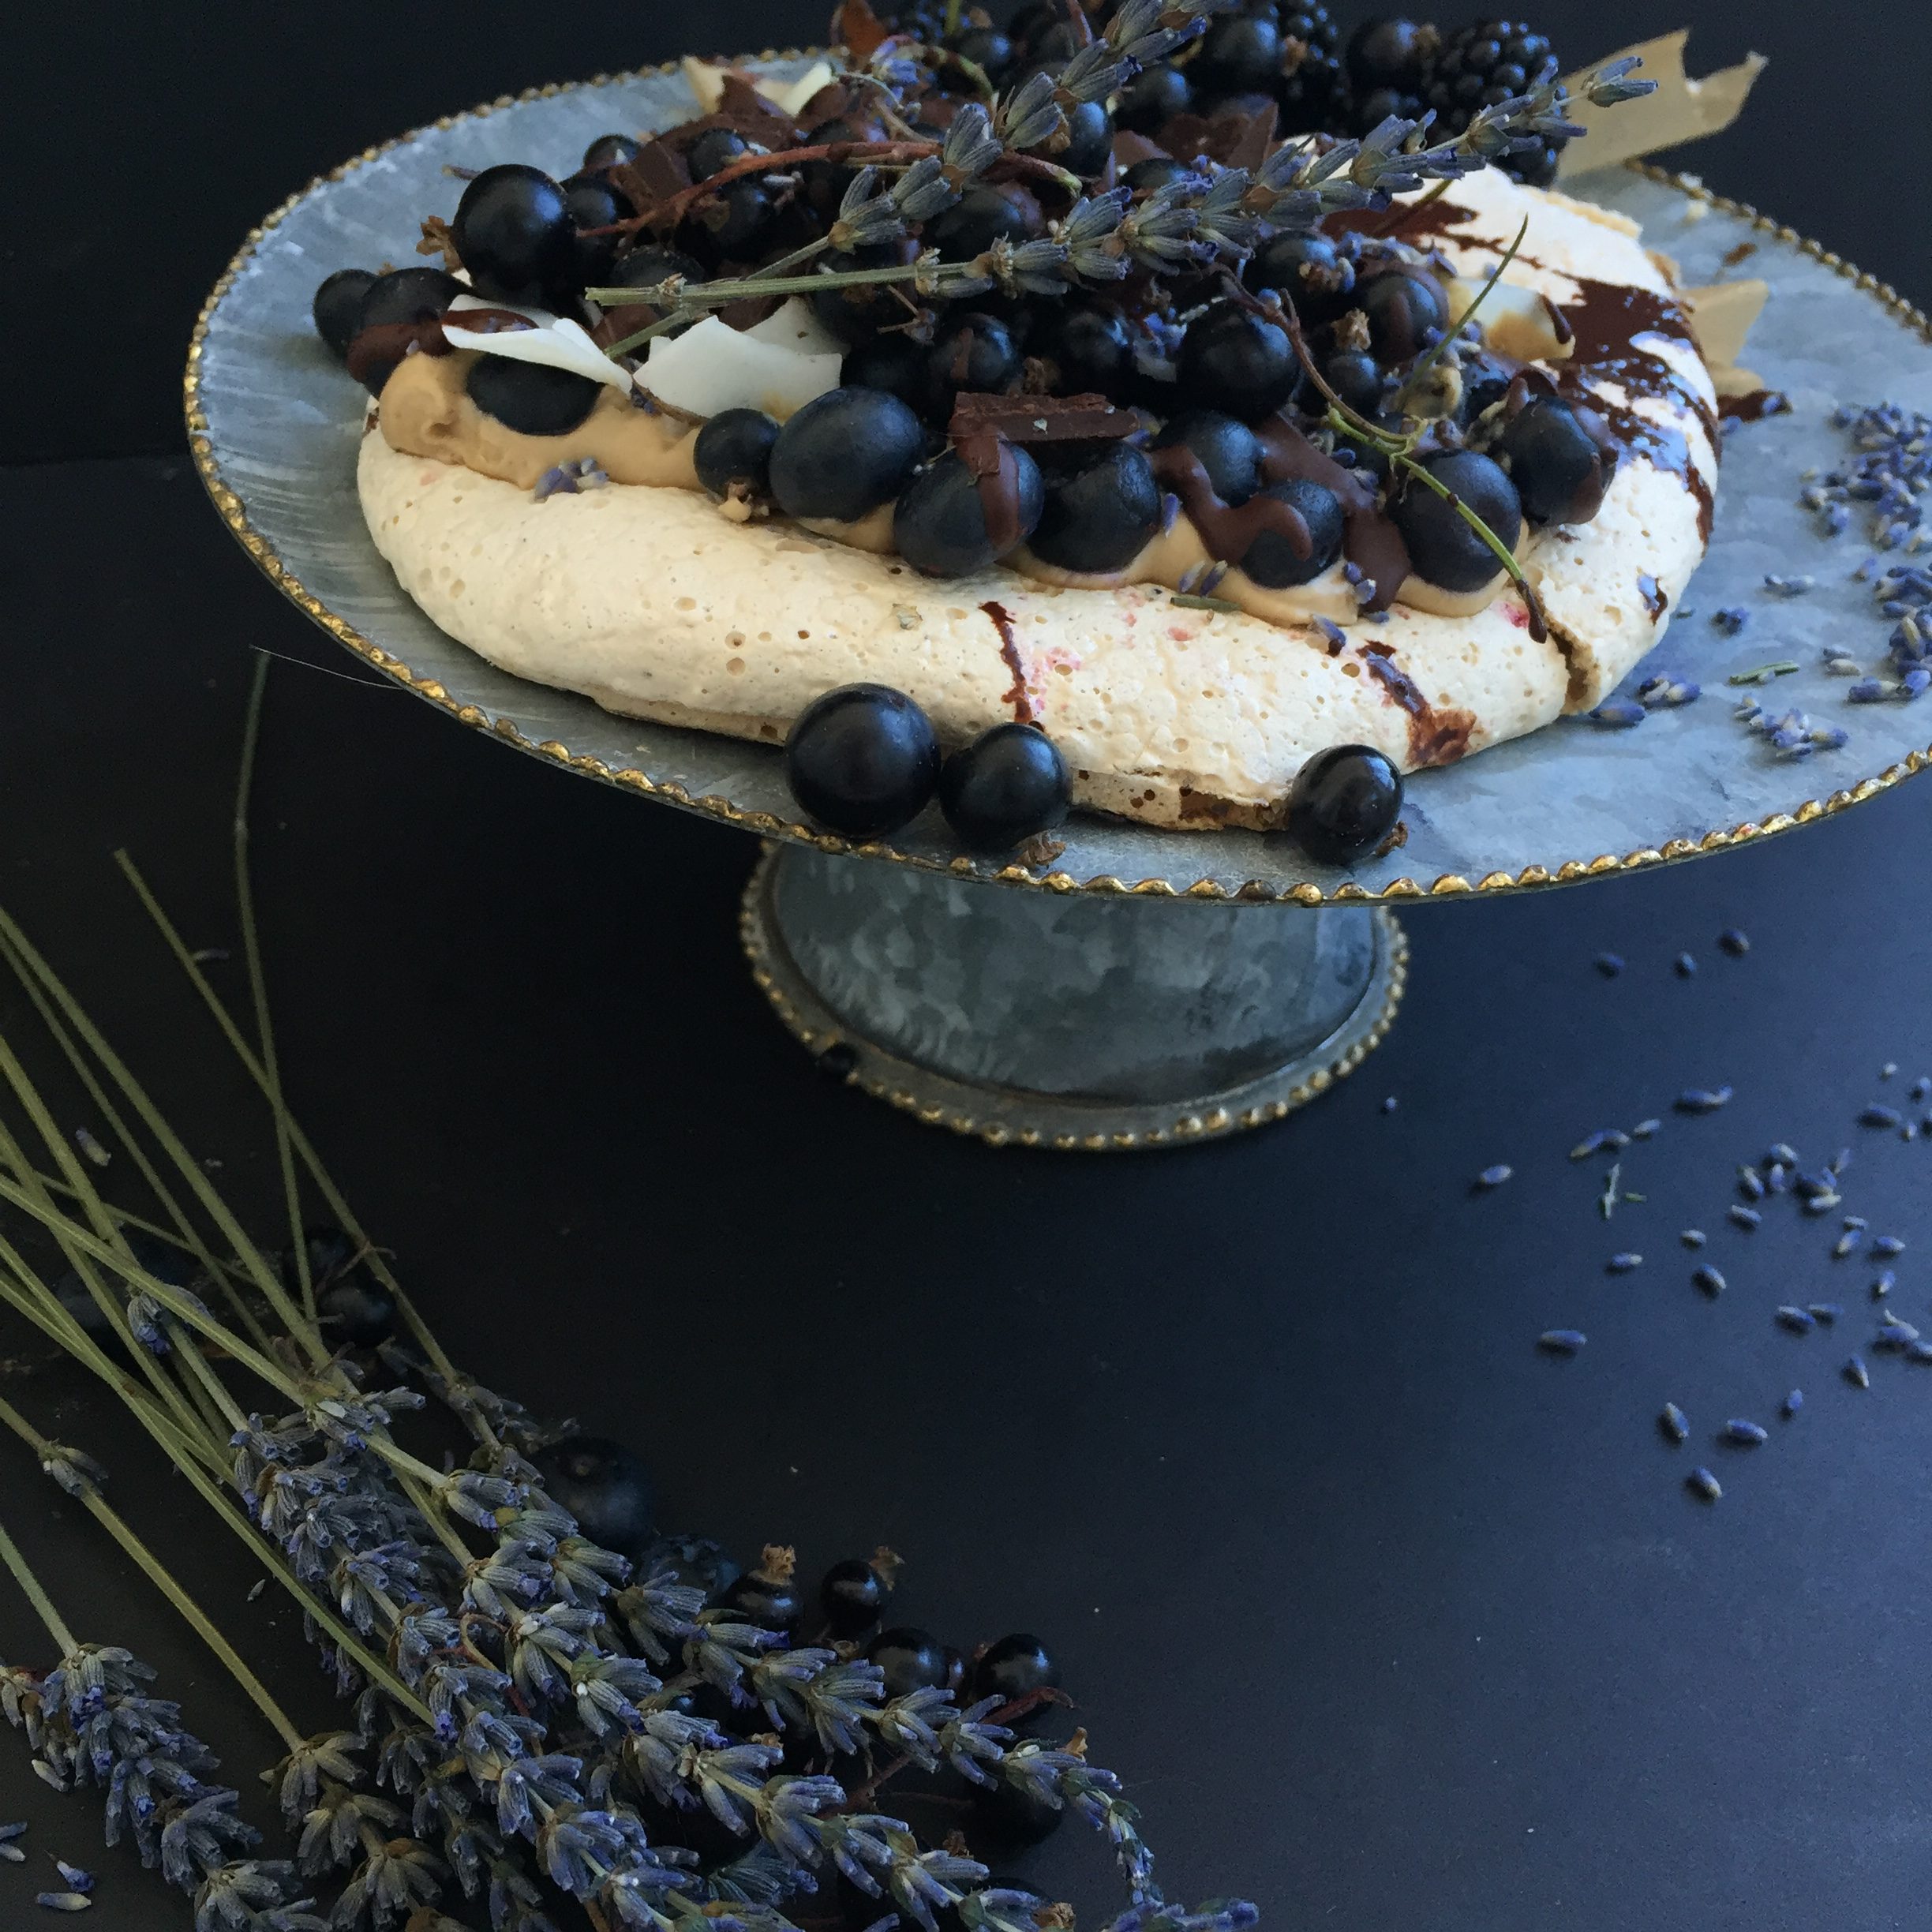 Vegan Pavlova with Lavender, blueberries, coconut and chocolate